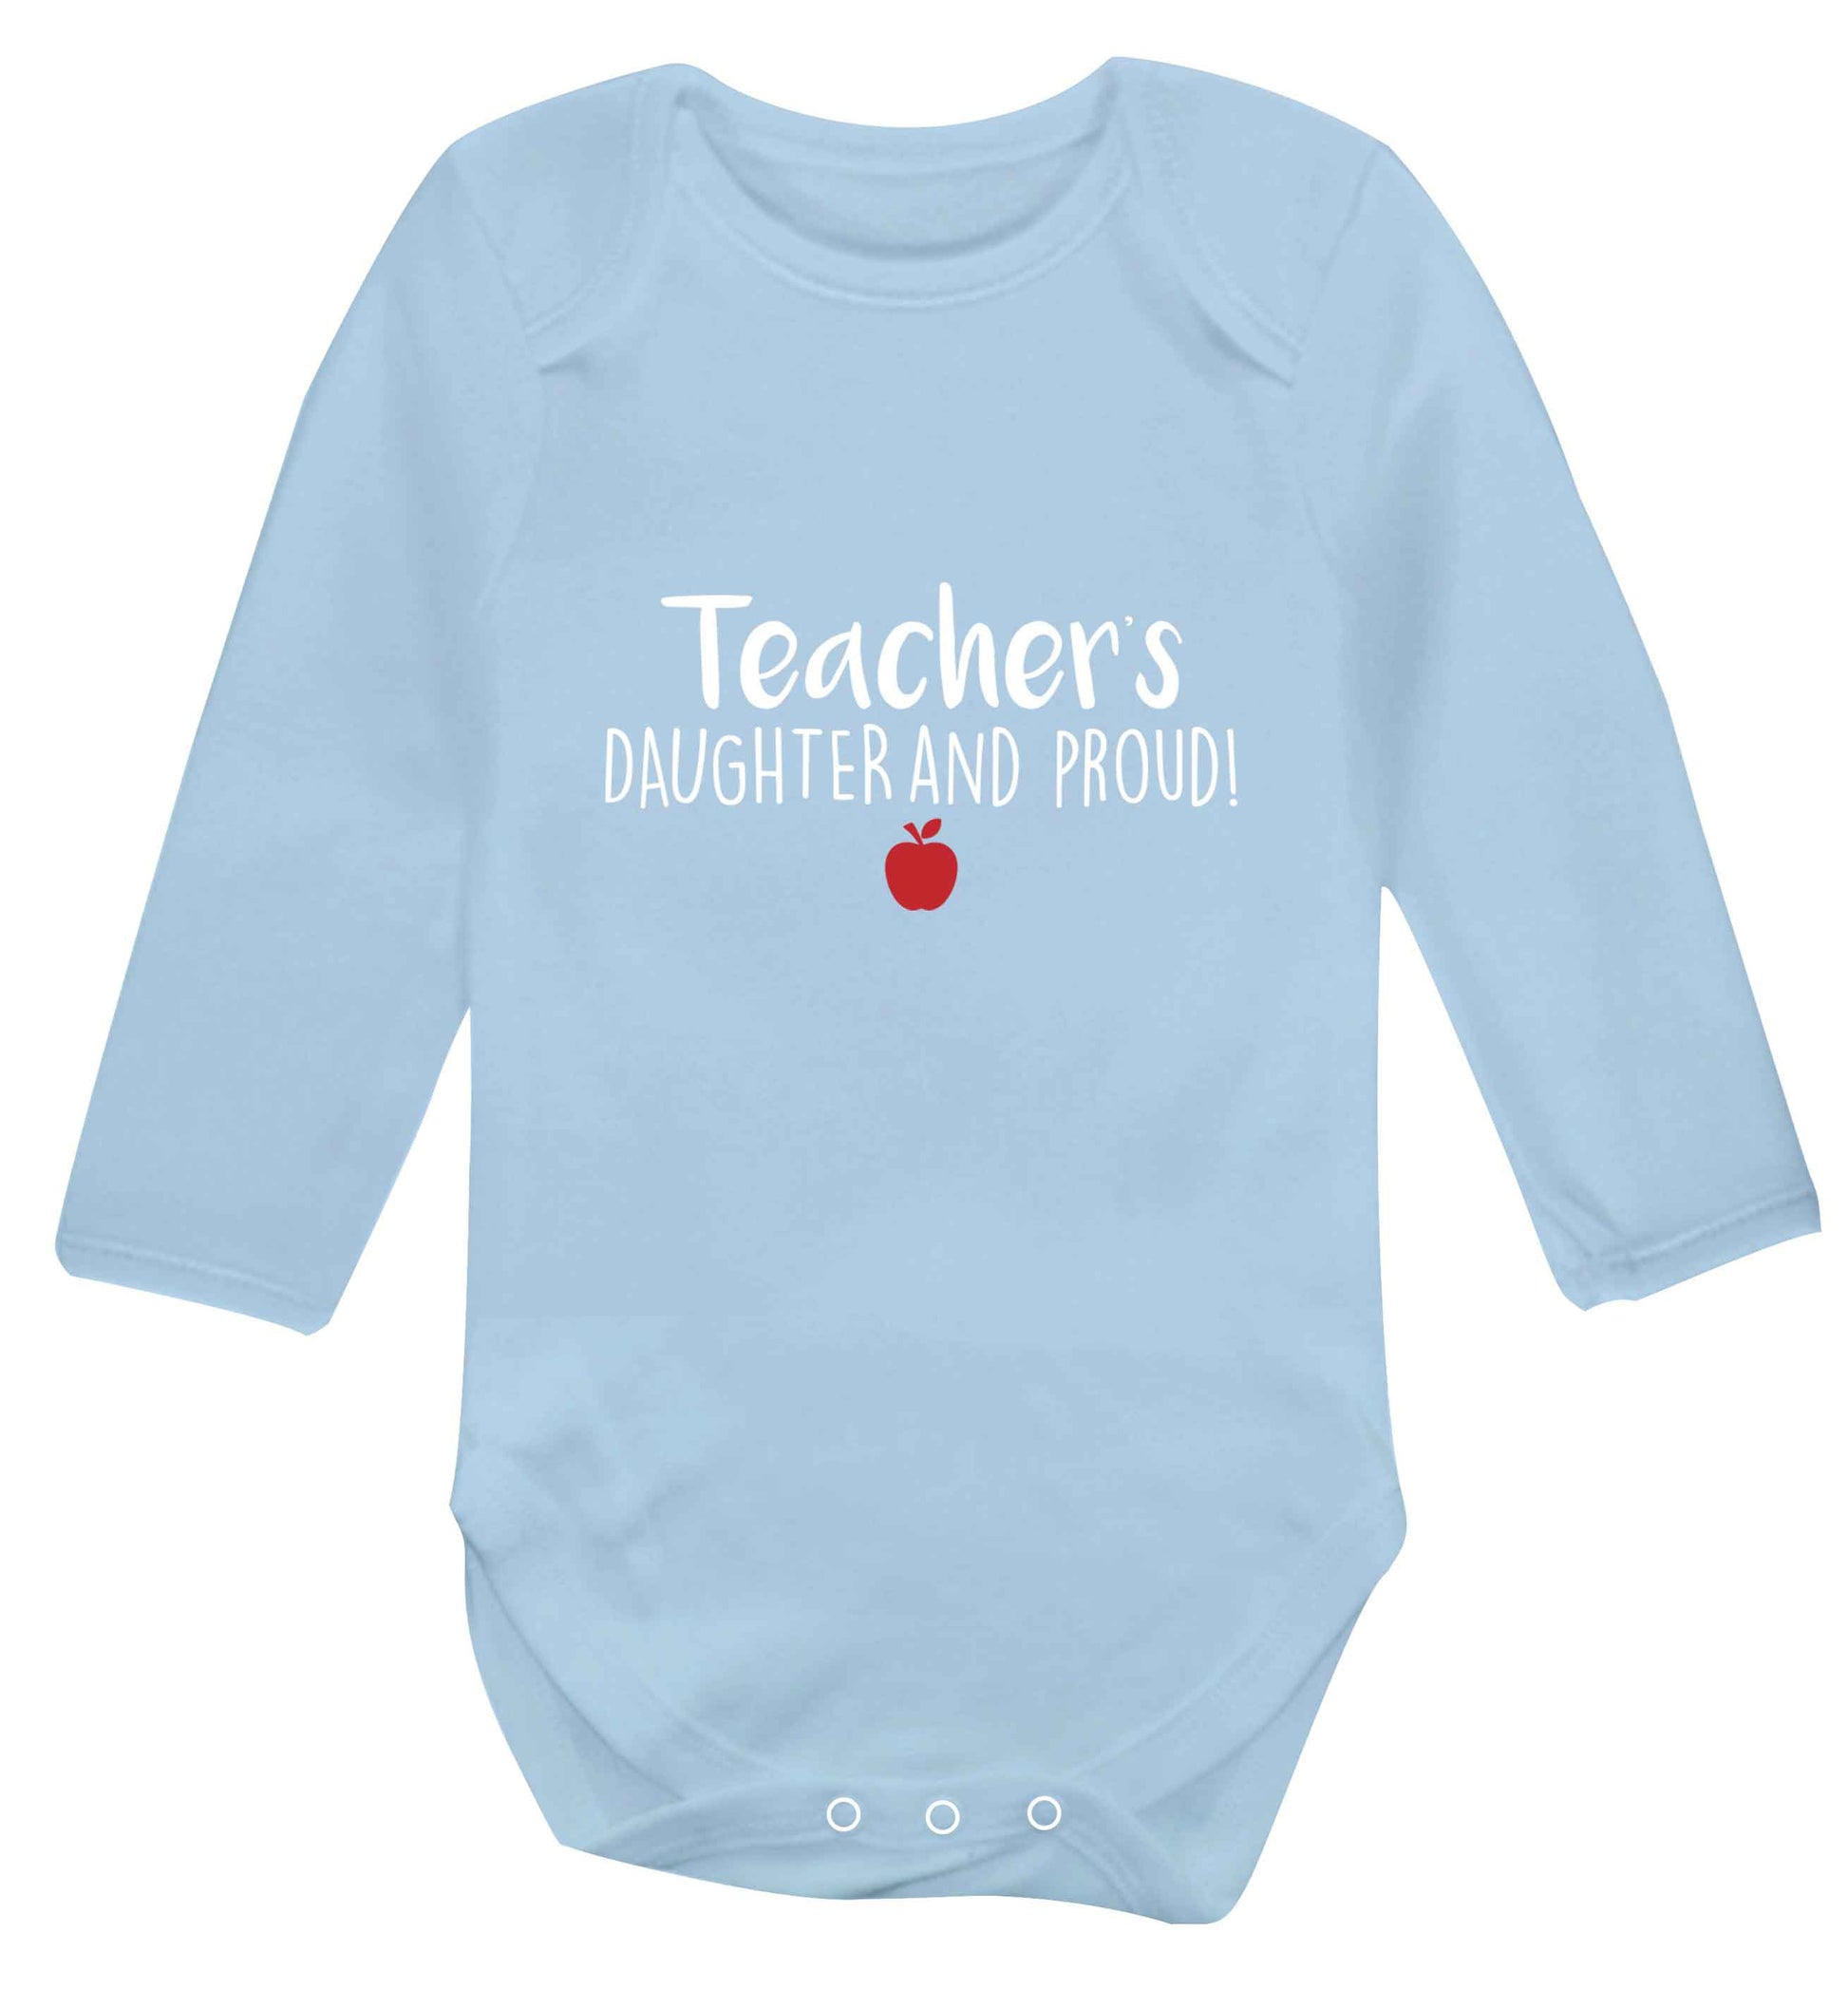 Teachers daughter and proud baby vest long sleeved pale blue 6-12 months